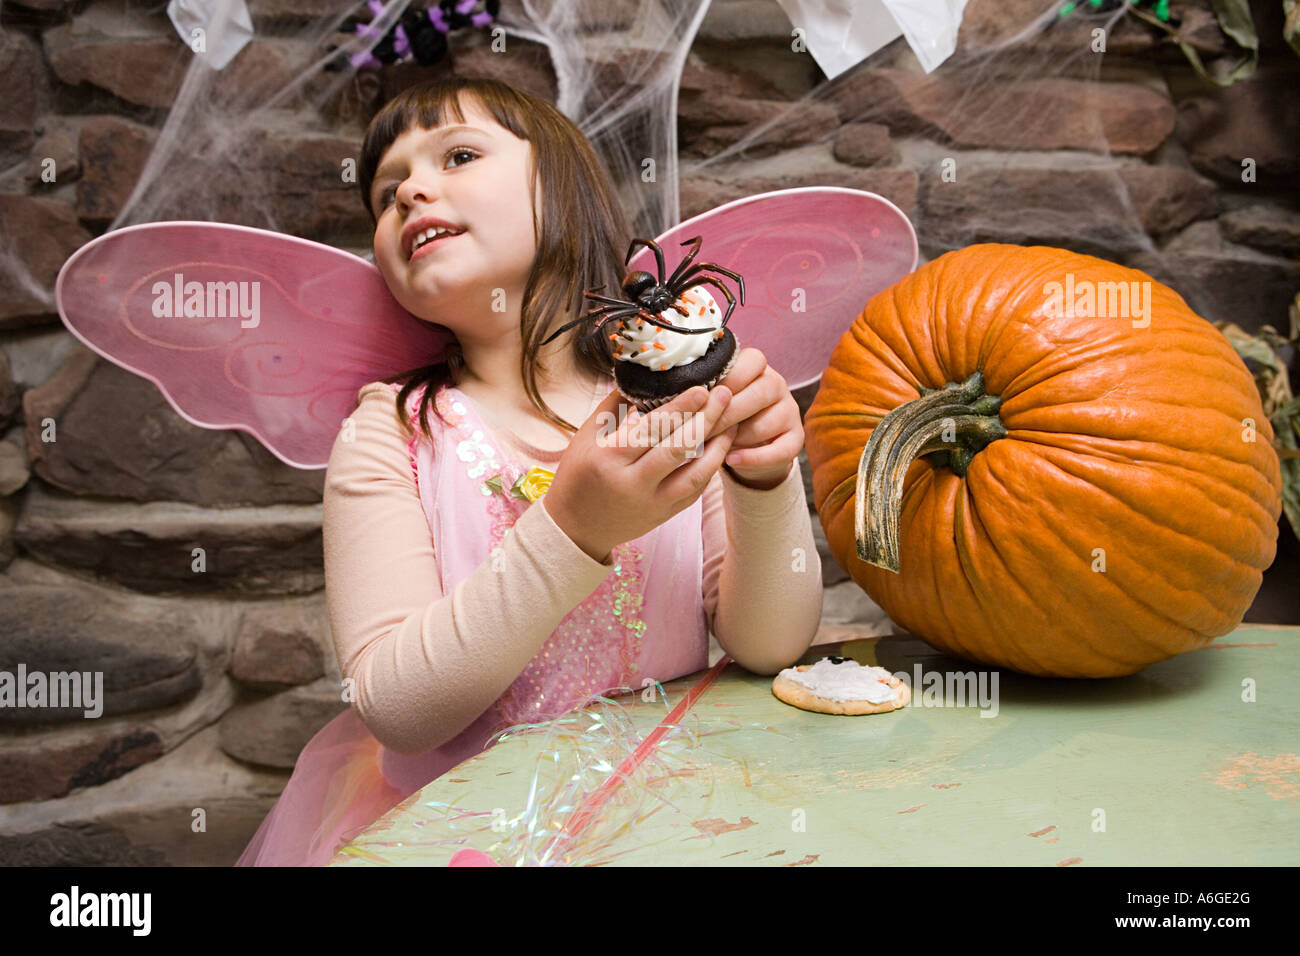 Girl with a spider cake Stock Photo